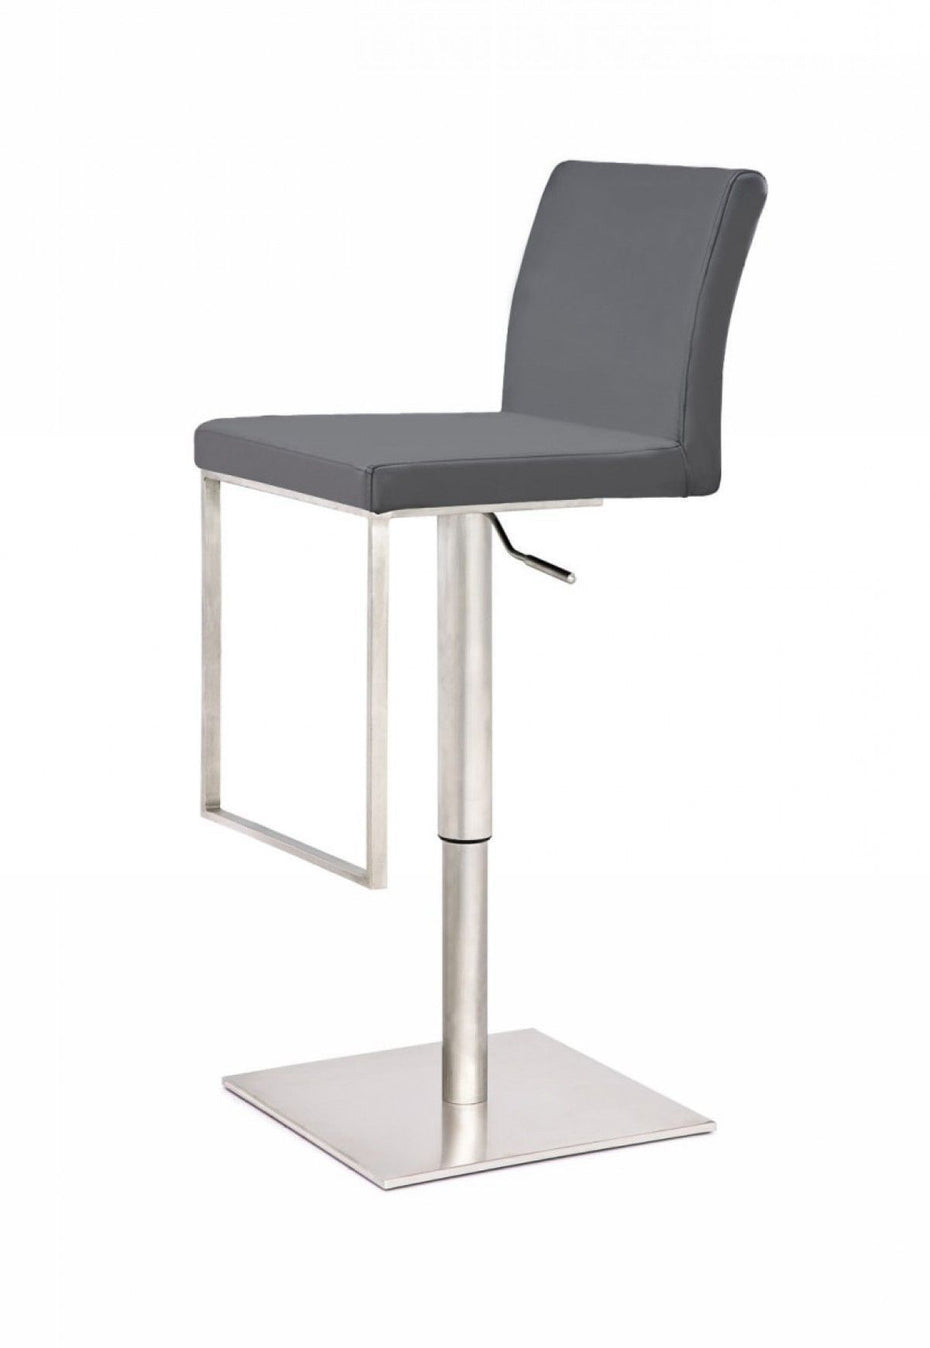 Faux Leather and Stainless Steel Swivel Low Back Adjustable Height Bar Chair With Footrest 41" - Gray